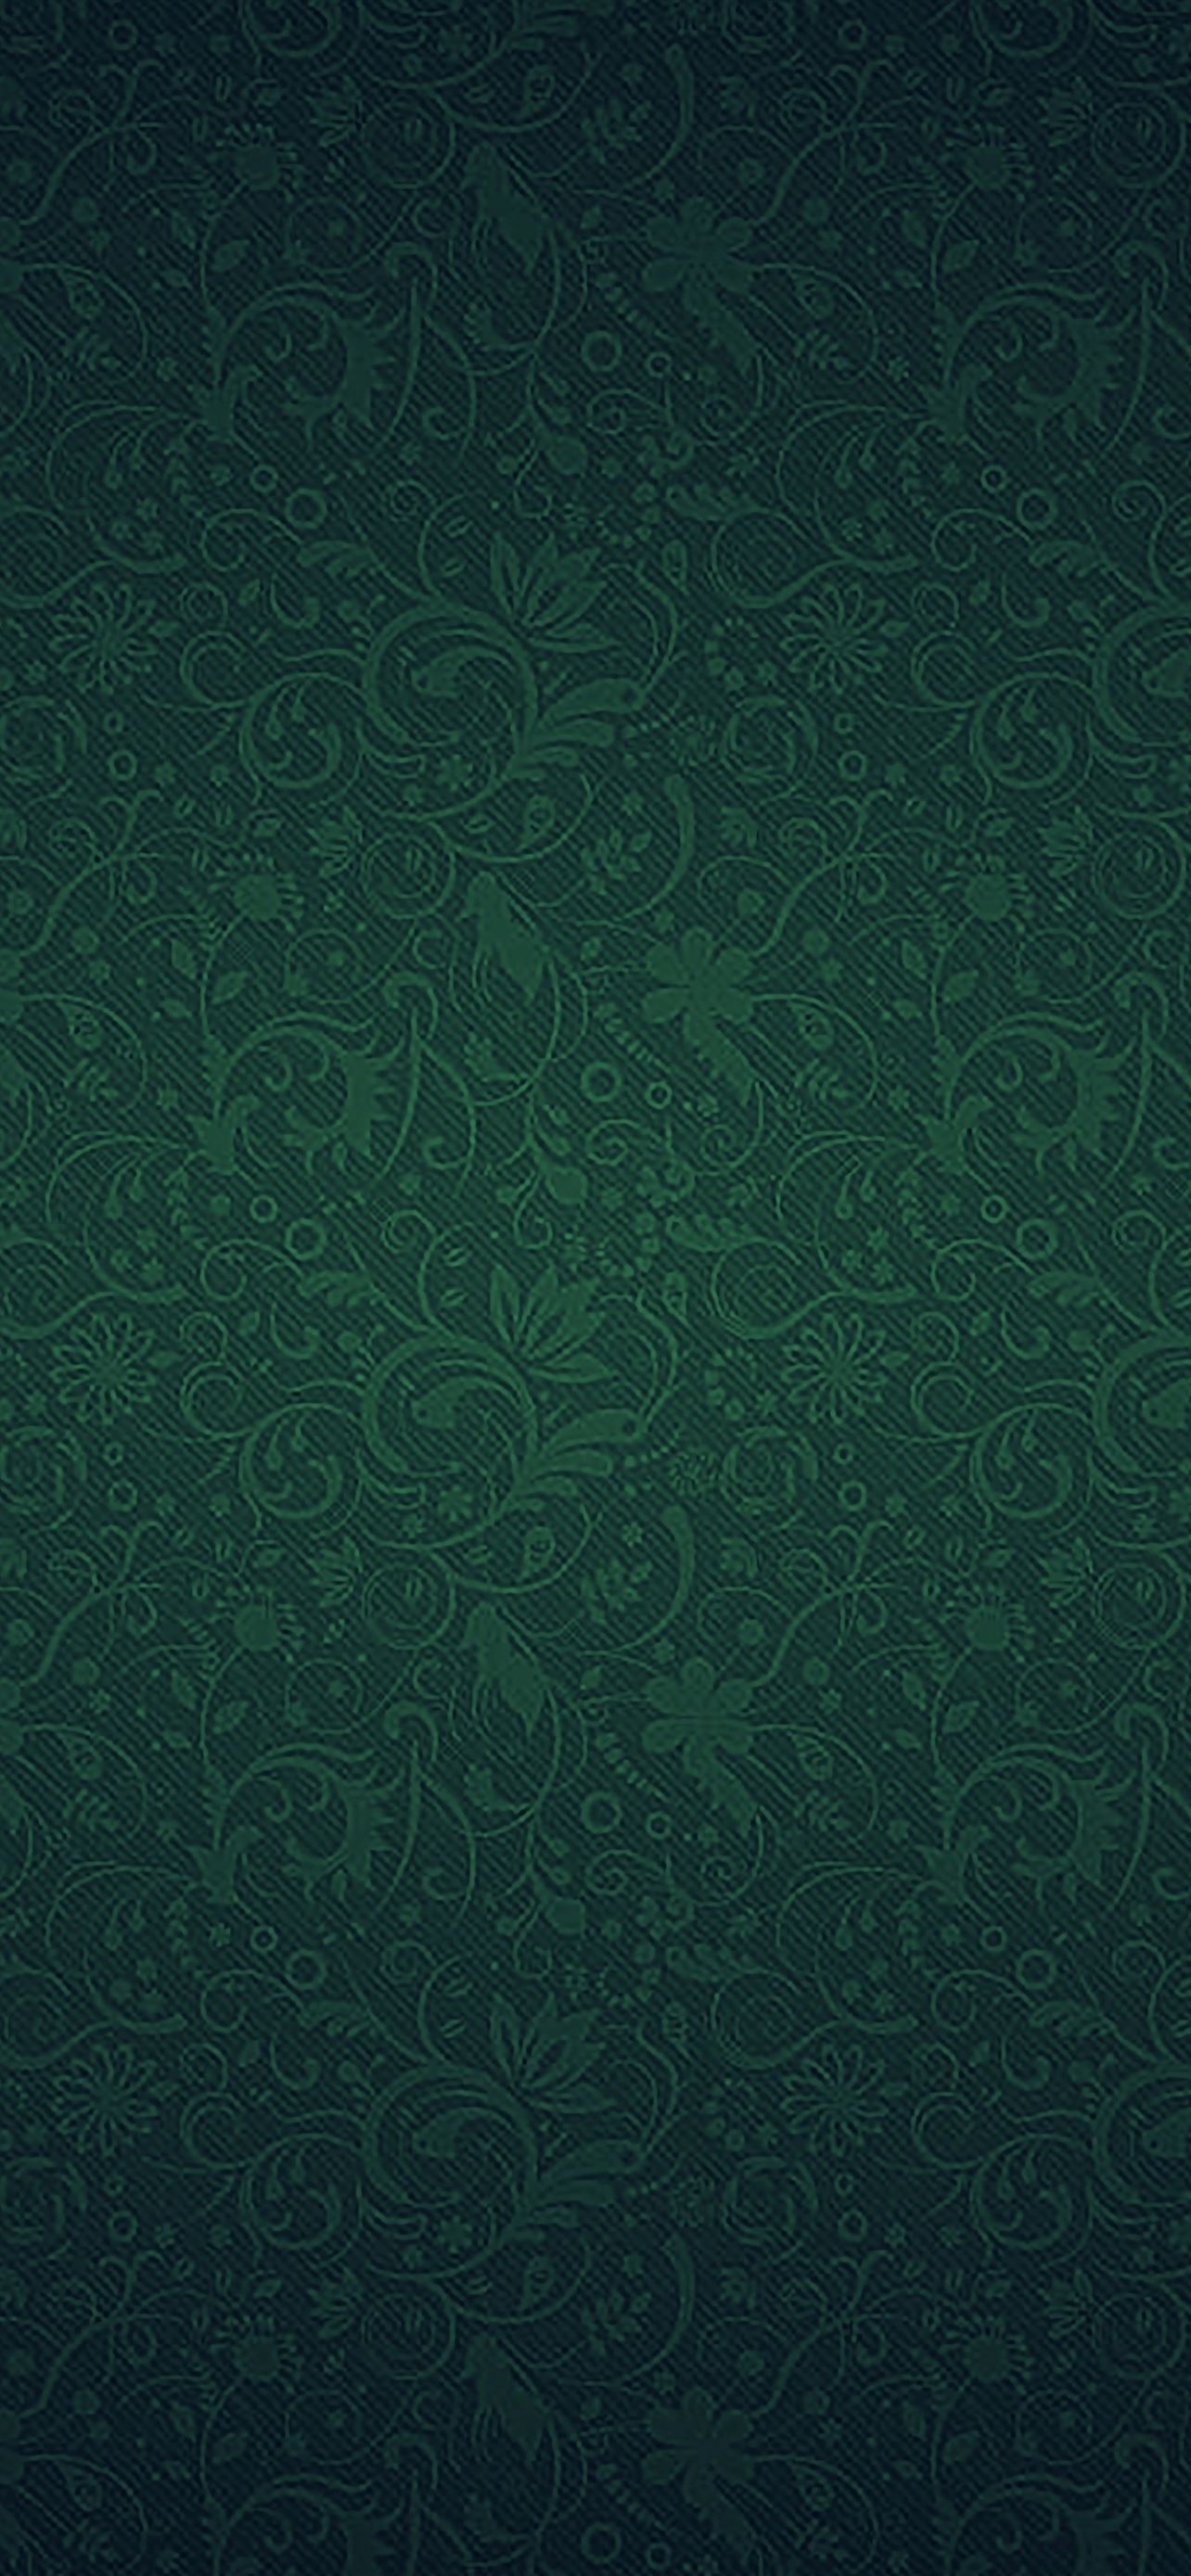 Green Ornaments Texture Pattern iPhone Wallpapers Free Download